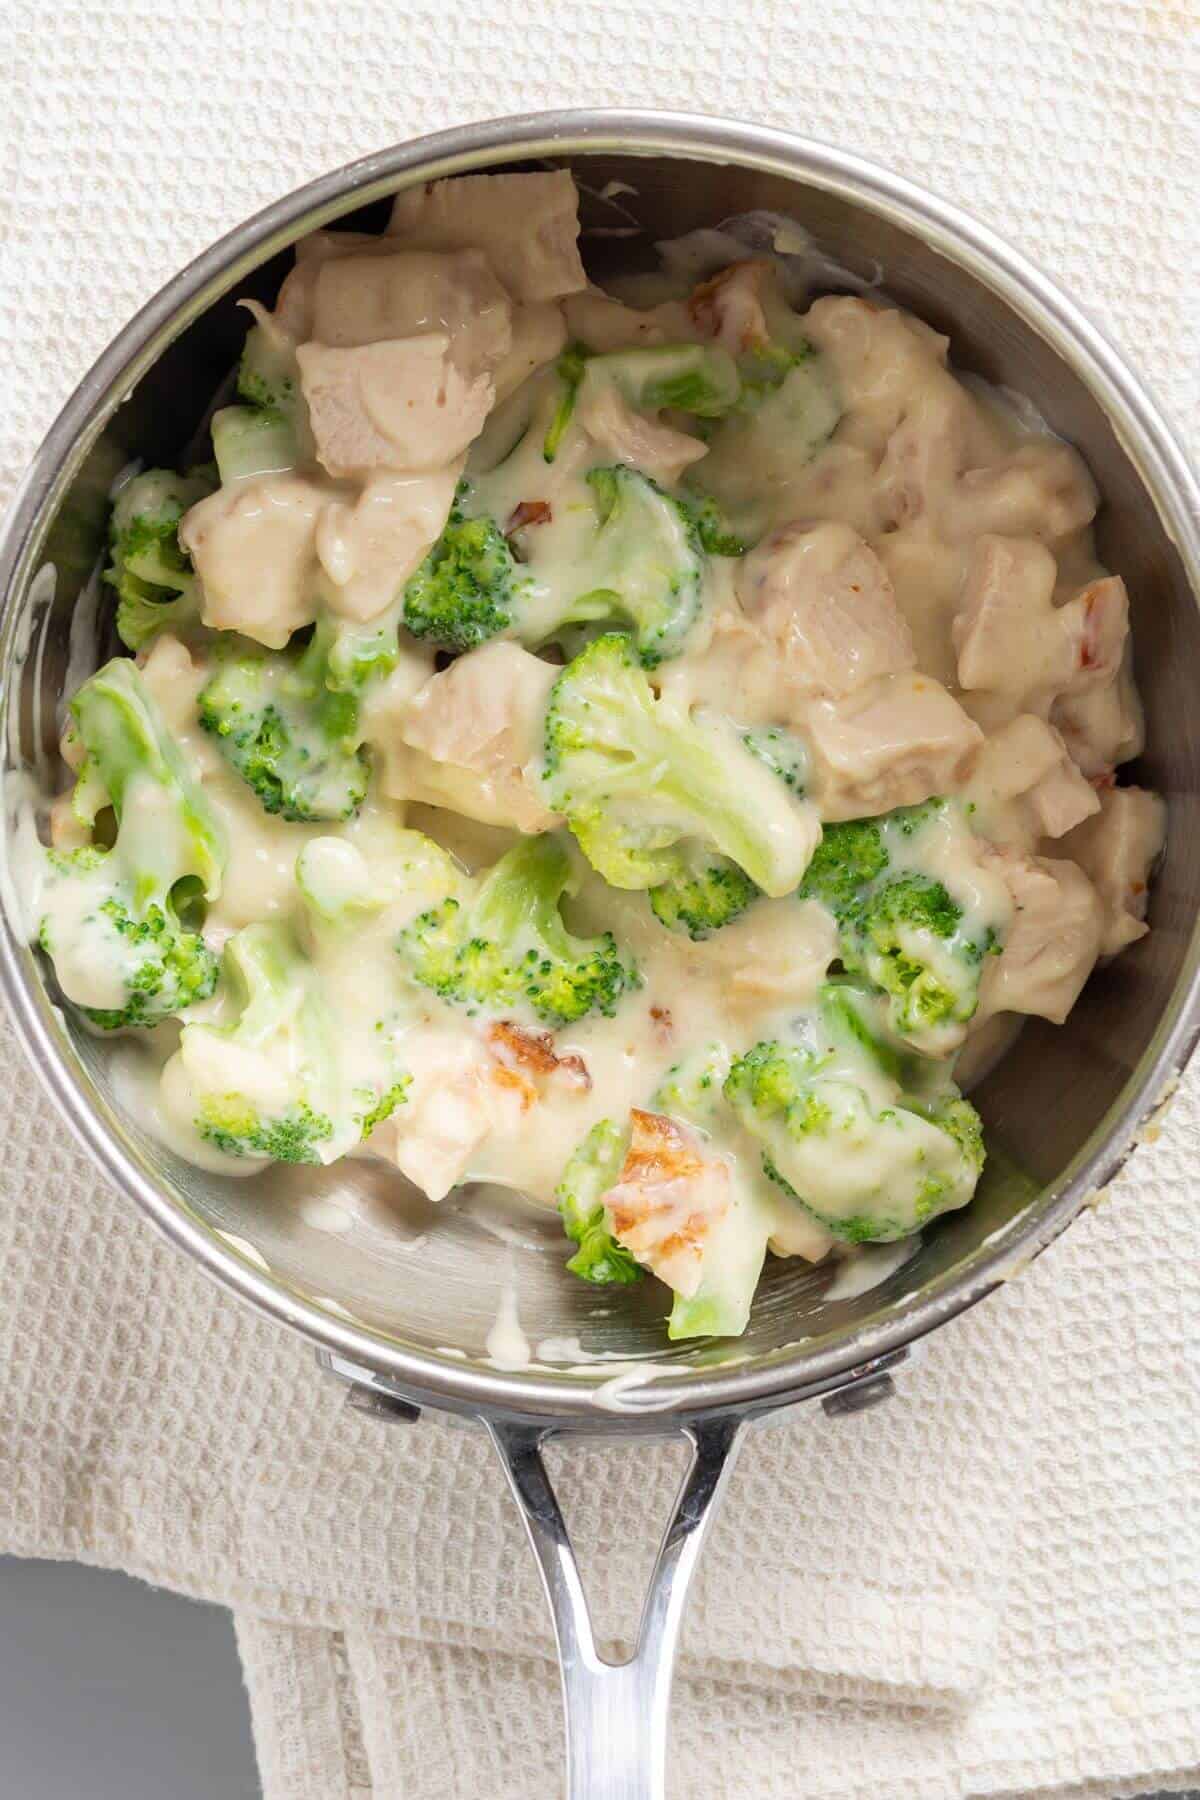 Chicken and broccoli mixed into the sauce in skillet.